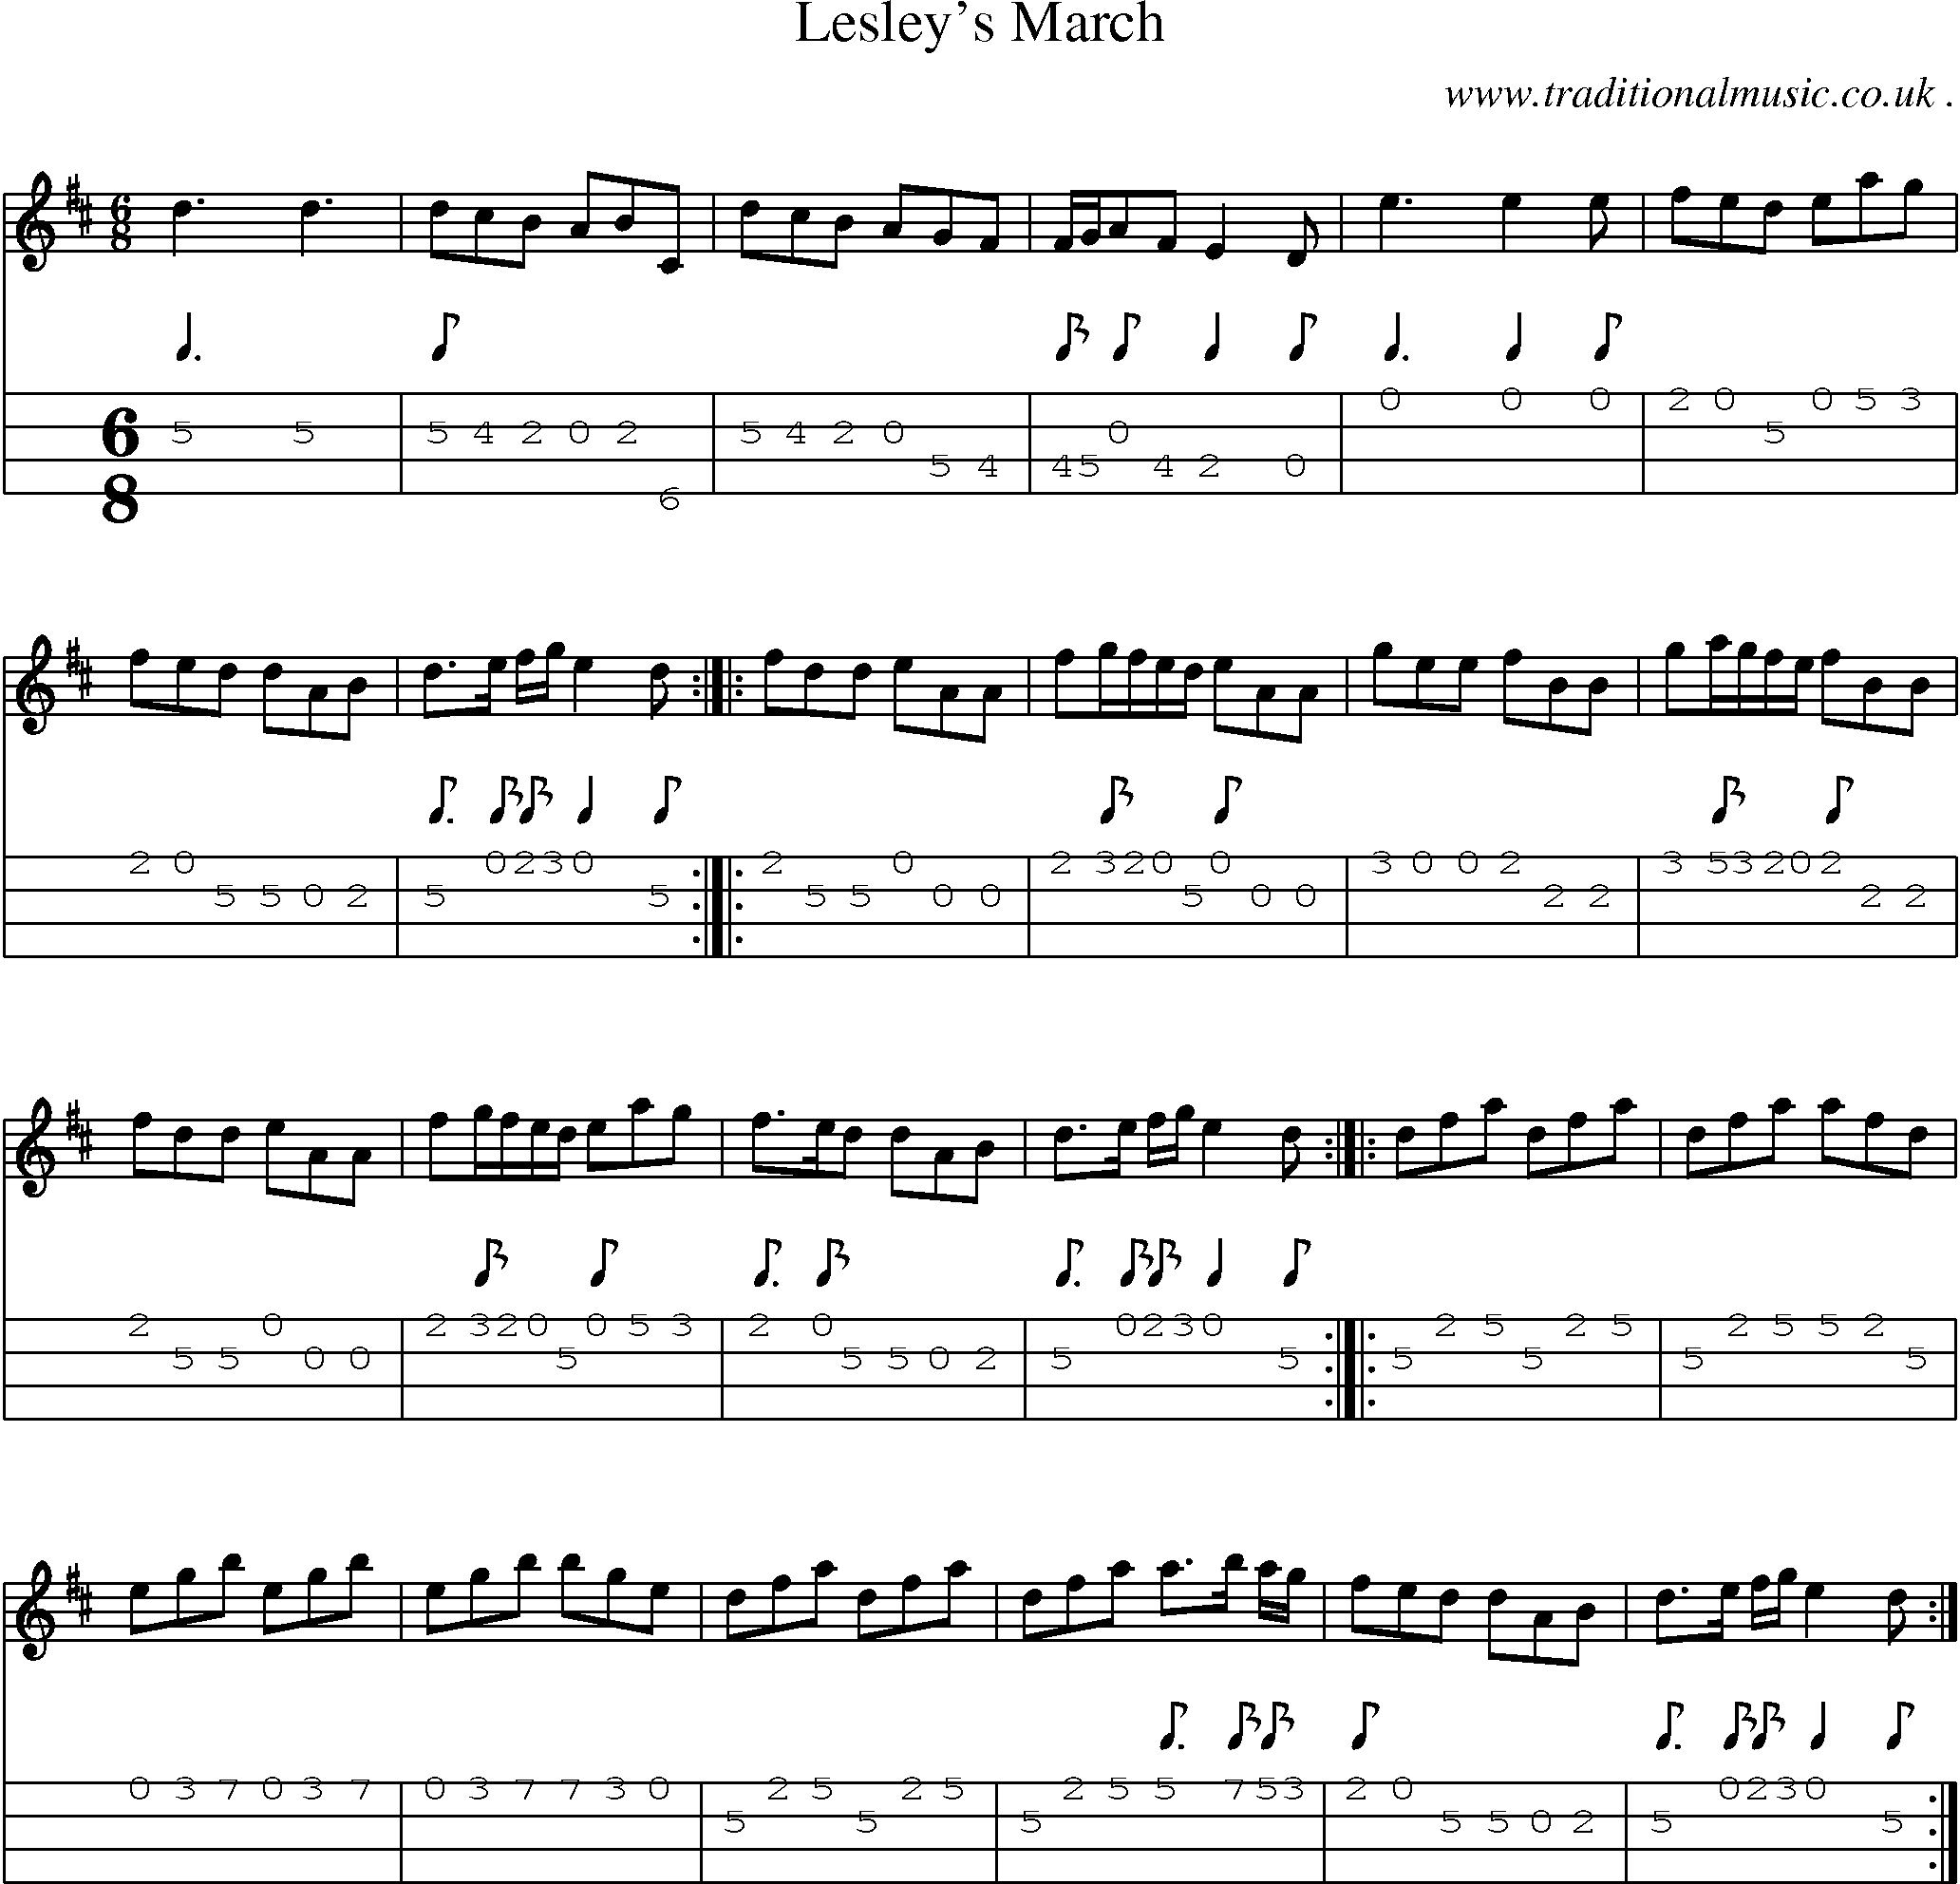 Sheet-music  score, Chords and Mandolin Tabs for Lesleys March